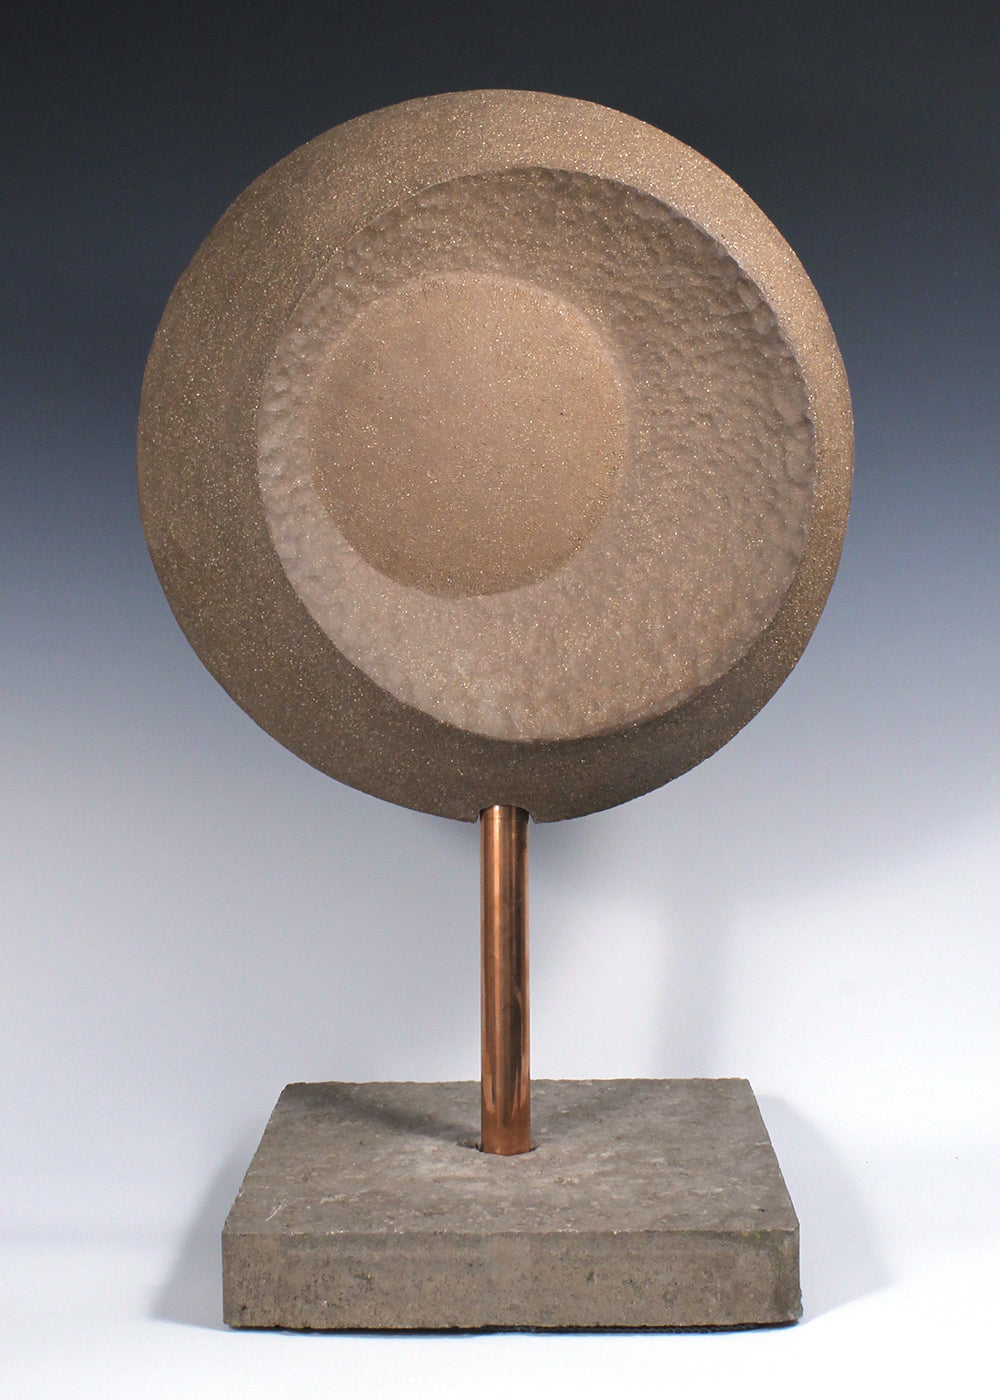 Large circular ceramic sculpture with convex and concave surfaces mounted on custom base with copper piping through a concrete base